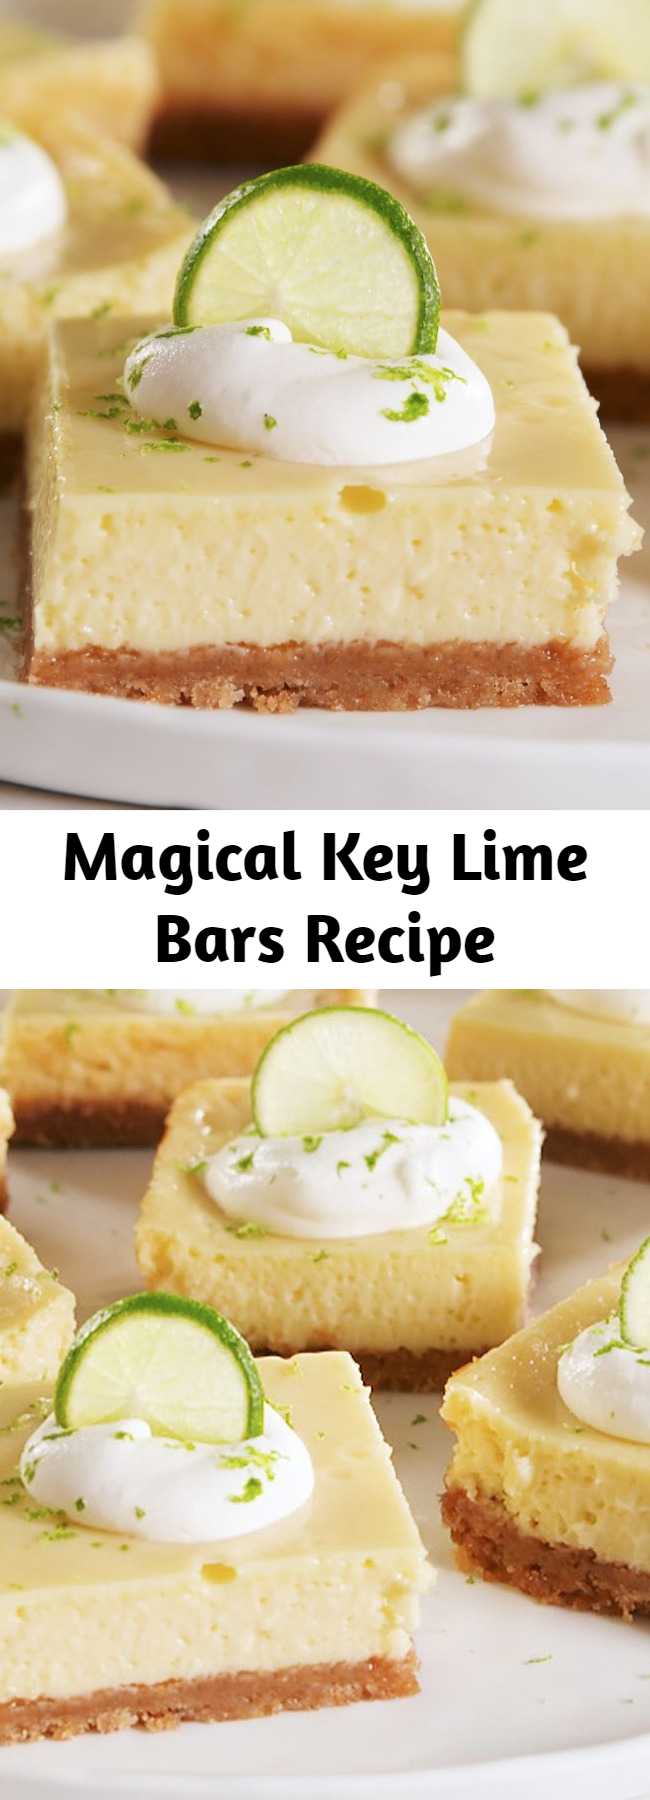 Magical Key Lime Bars Recipe - No added sugar is needed in these bars! The ever-magical sweetened condensed milk provides all the sugar you need. #easyrecipe #dessert #baking #keylime #sweets